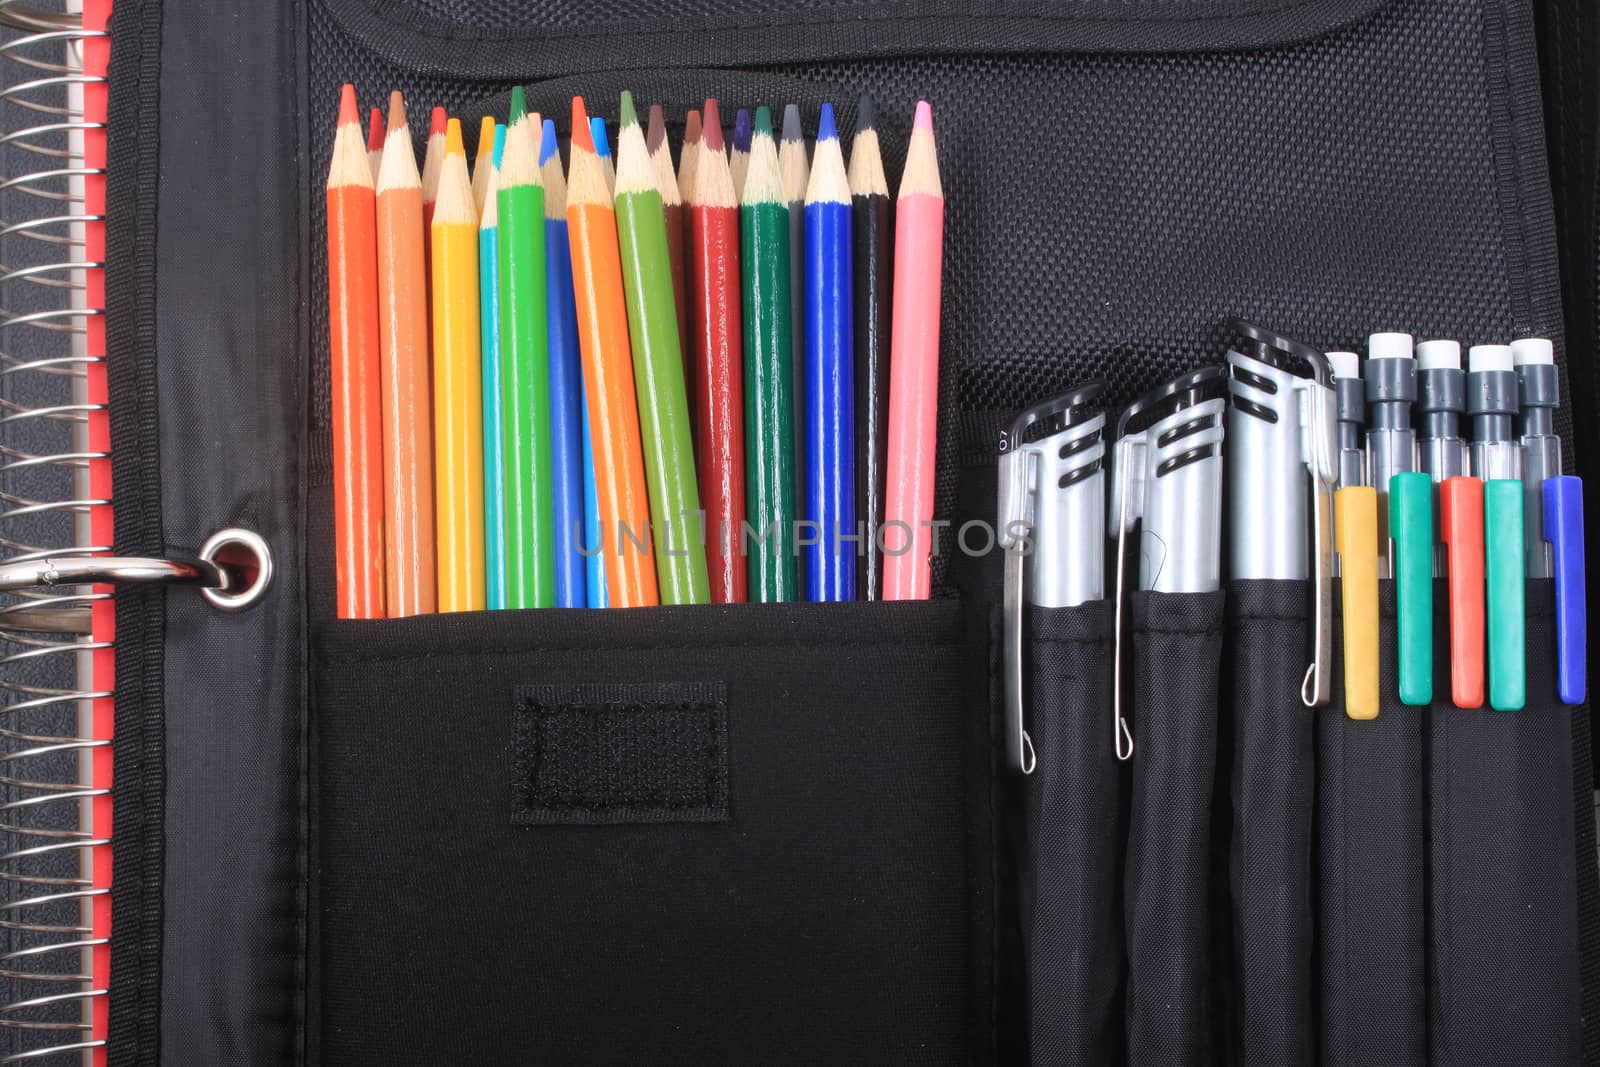 Colorful sharpened  pencil crayons for school in three ring binder pocket with pens on the side